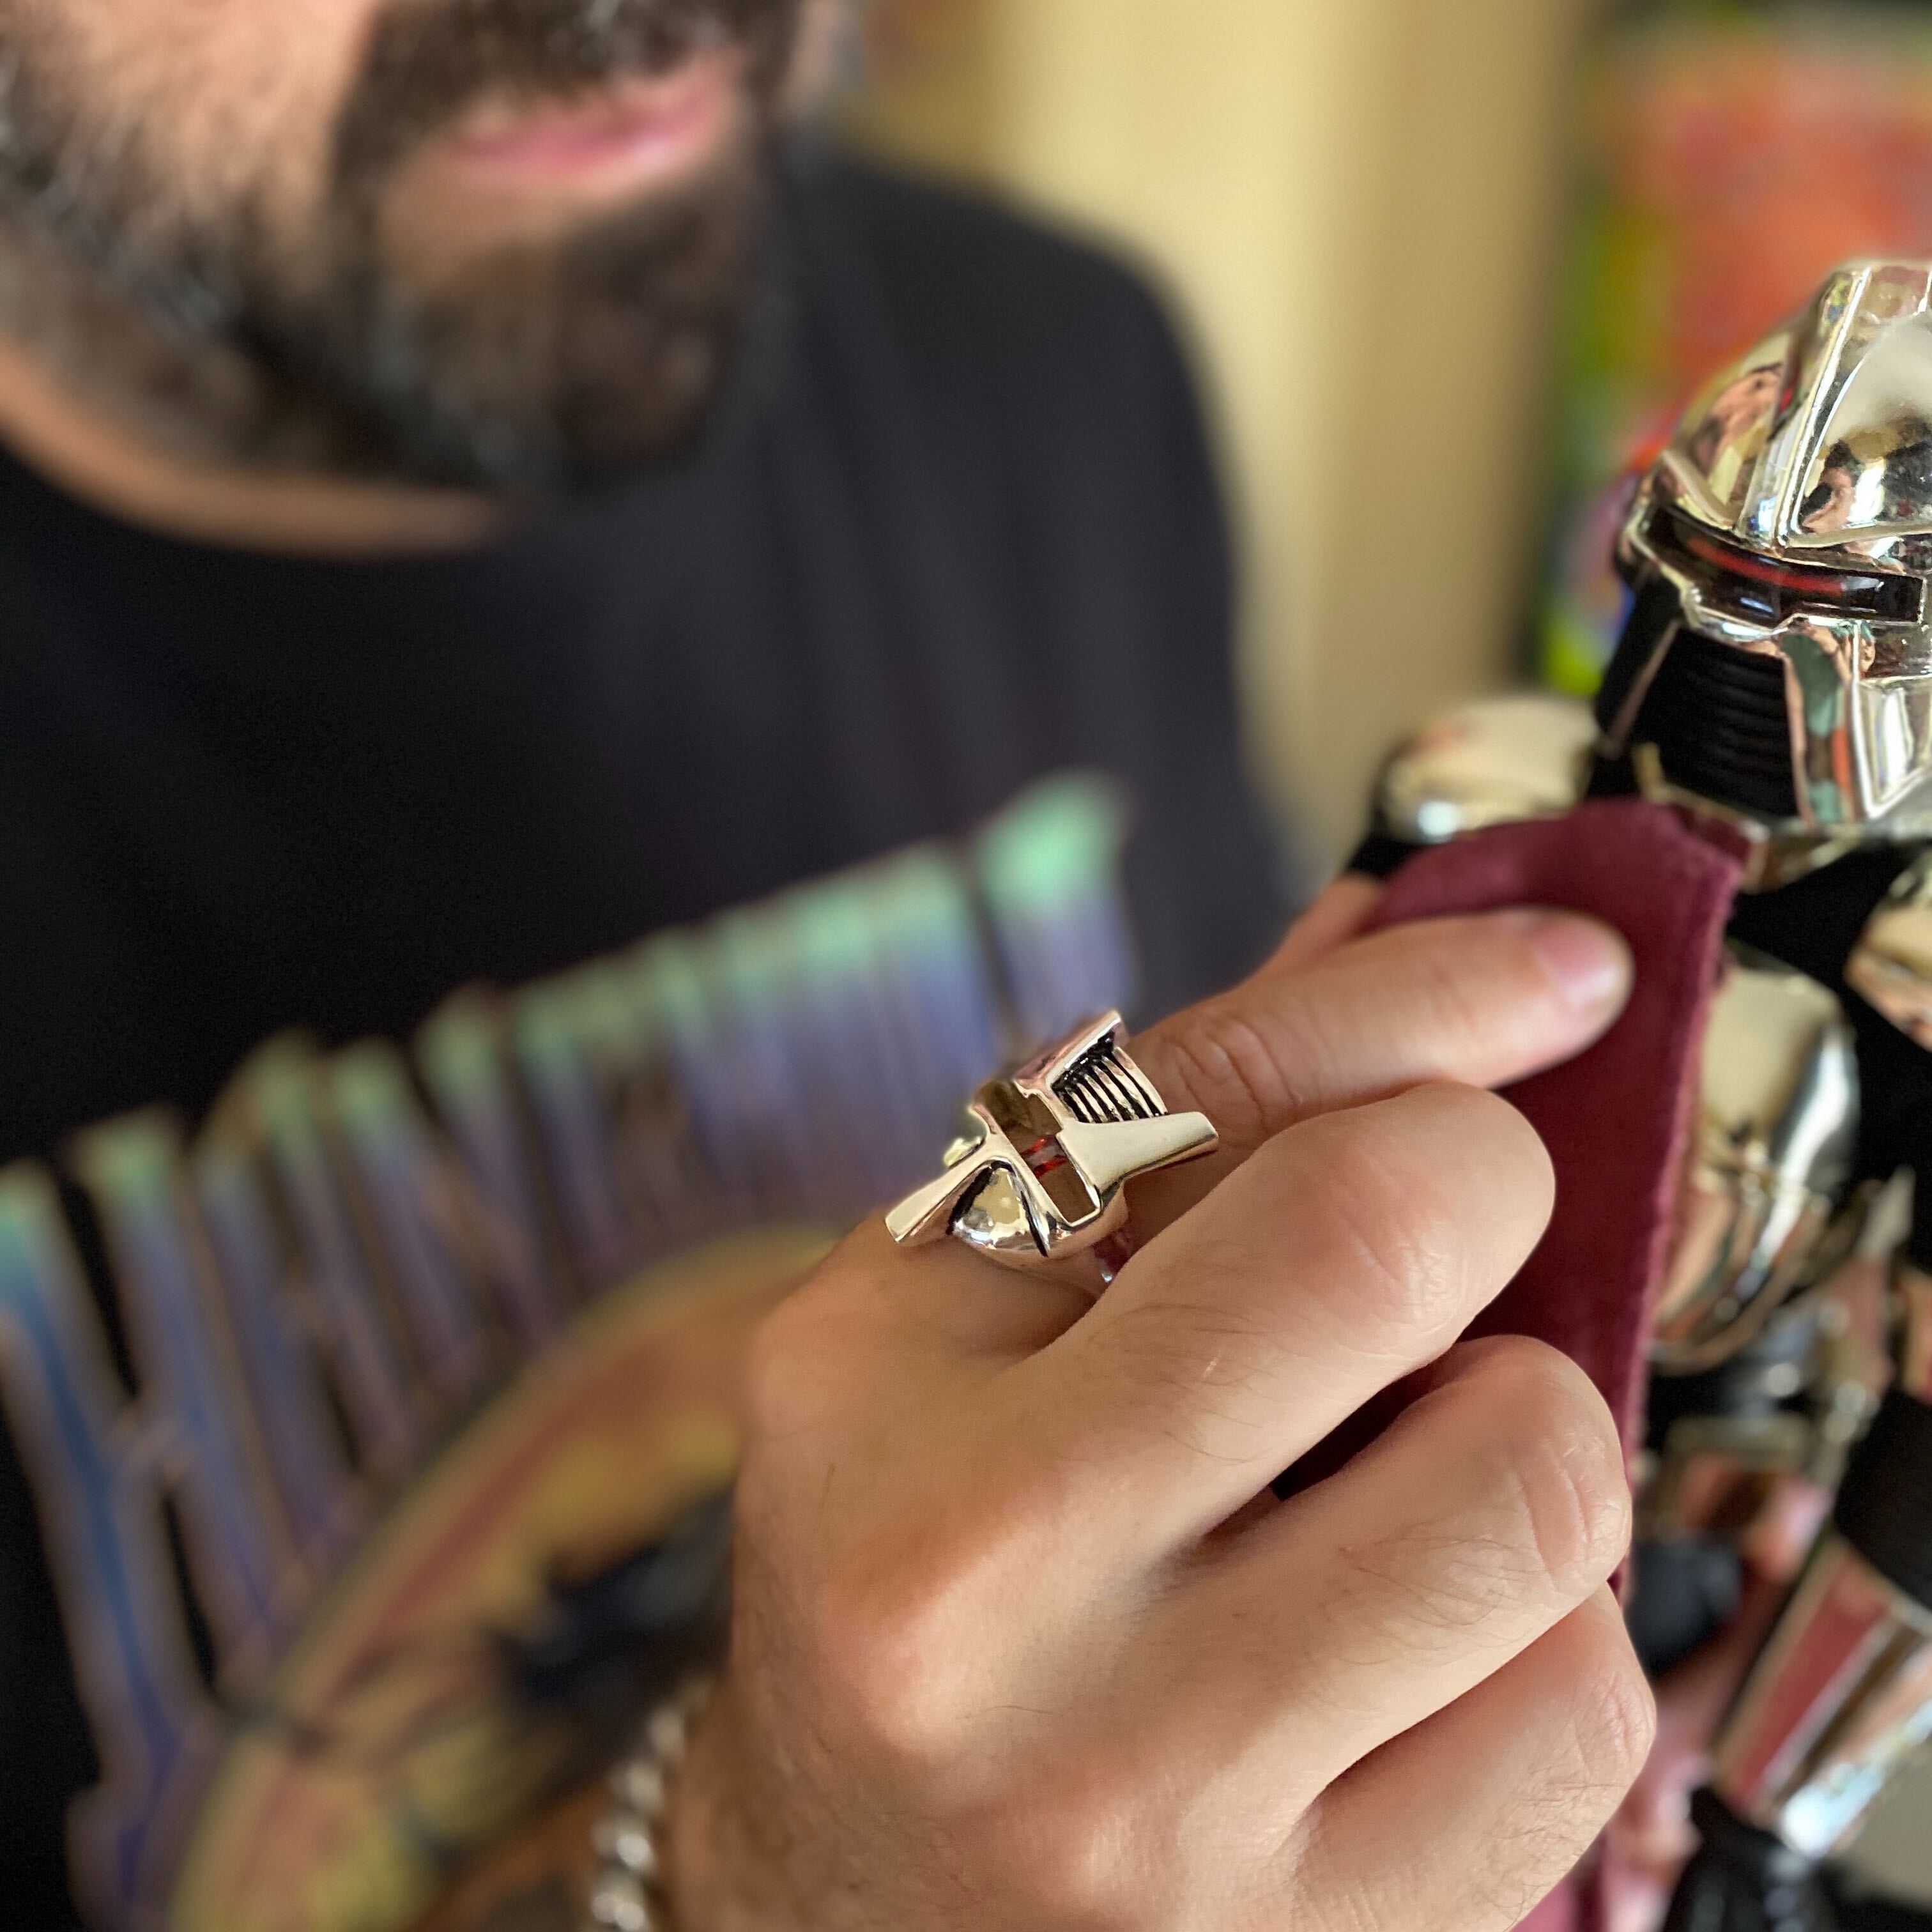 shot of a man wearing the raider ring playing the a battlestar galactica toy